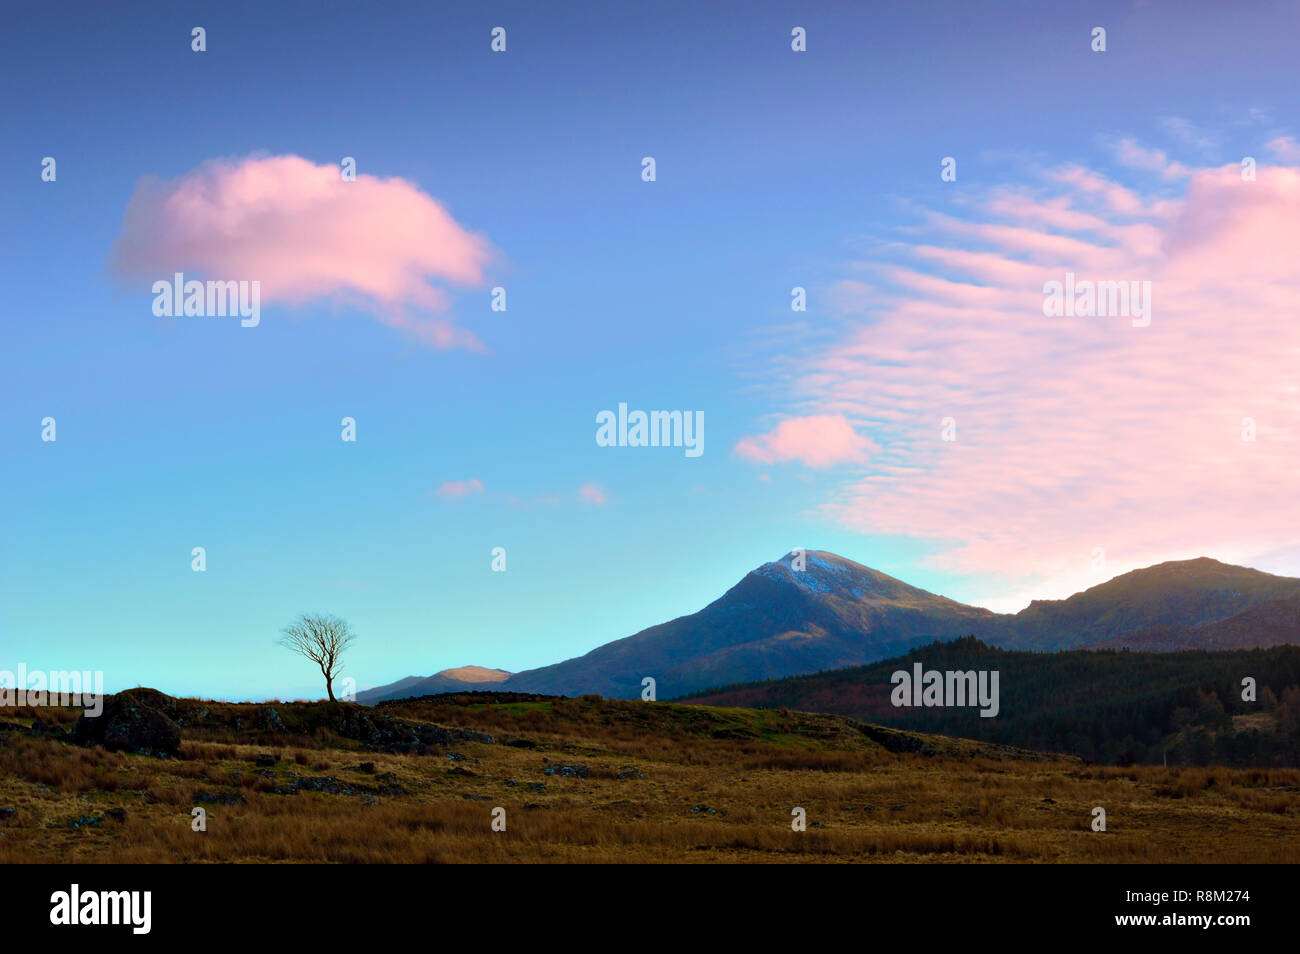 A winter's evening view of the sky and mountains in the Snowdonia National Park, Wales. Stock Photo